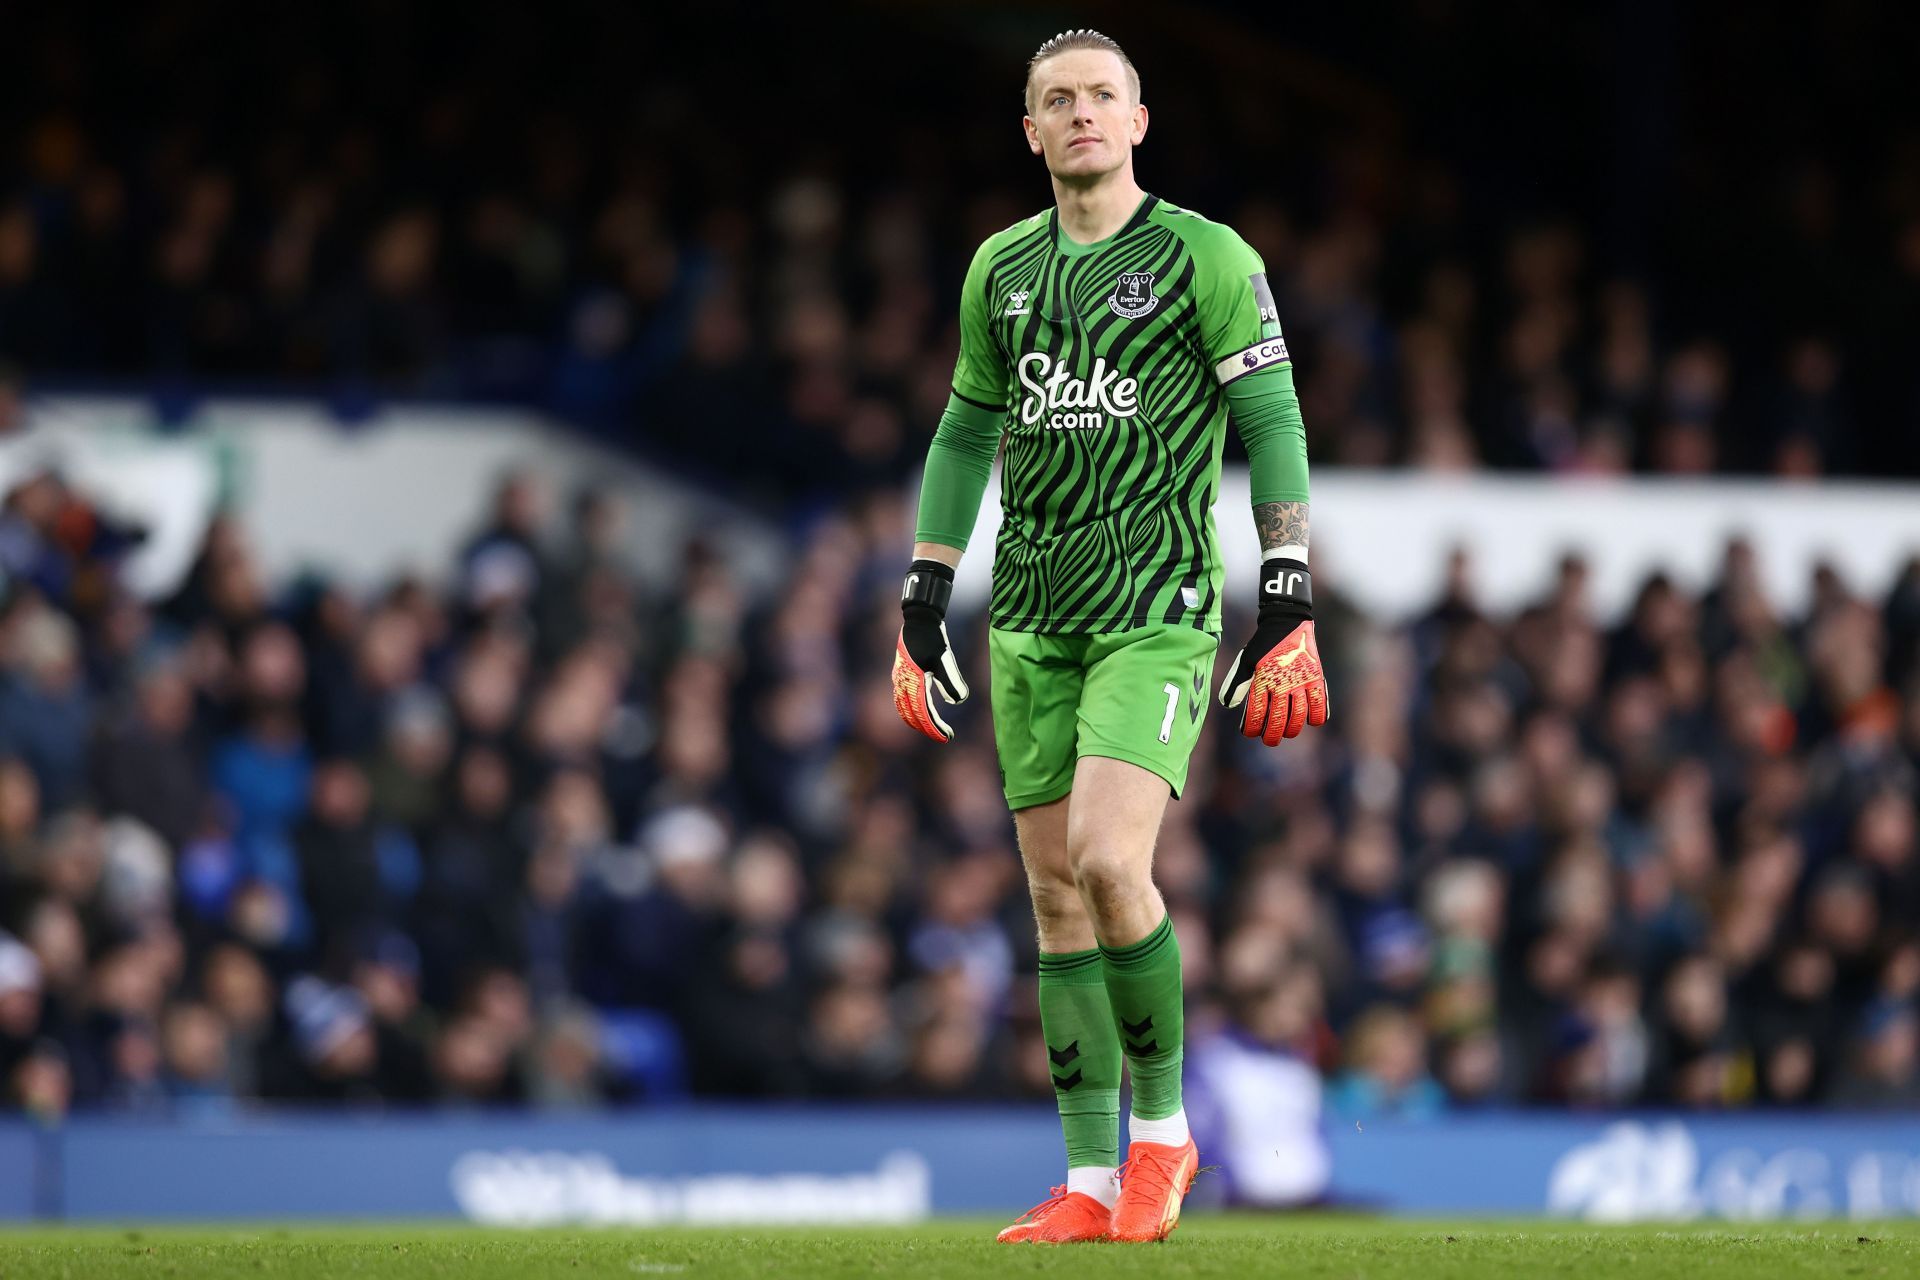 The Red Devils could make a move for Jordan Pickford.